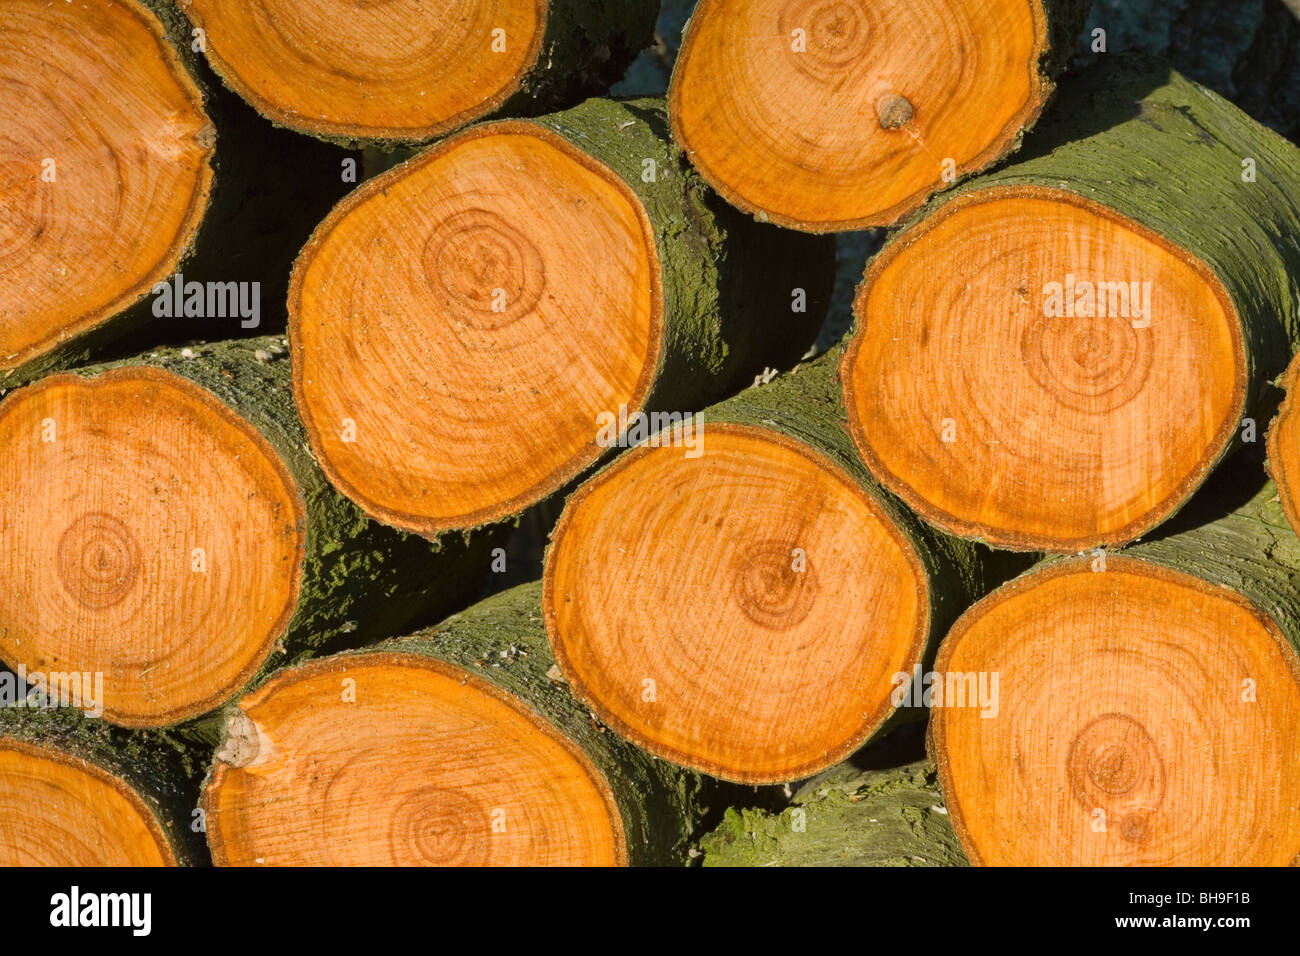 Alder (Alnus glutinosa). Freshly cut logs made from one trunk. Annual growth rings shown. Stock Photo